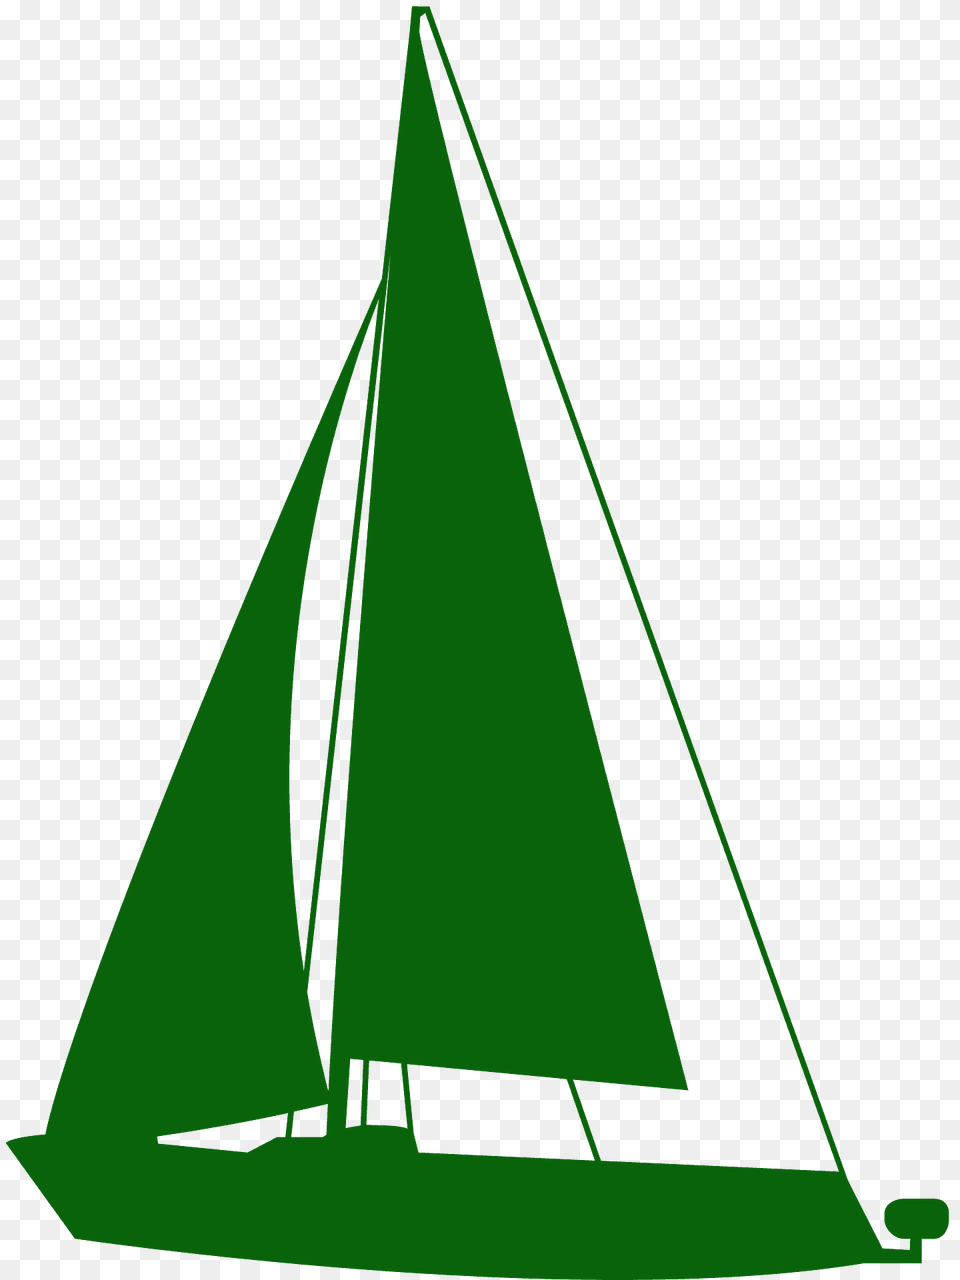 Sailboat Silhouette, Boat, Transportation, Vehicle, Yacht Png